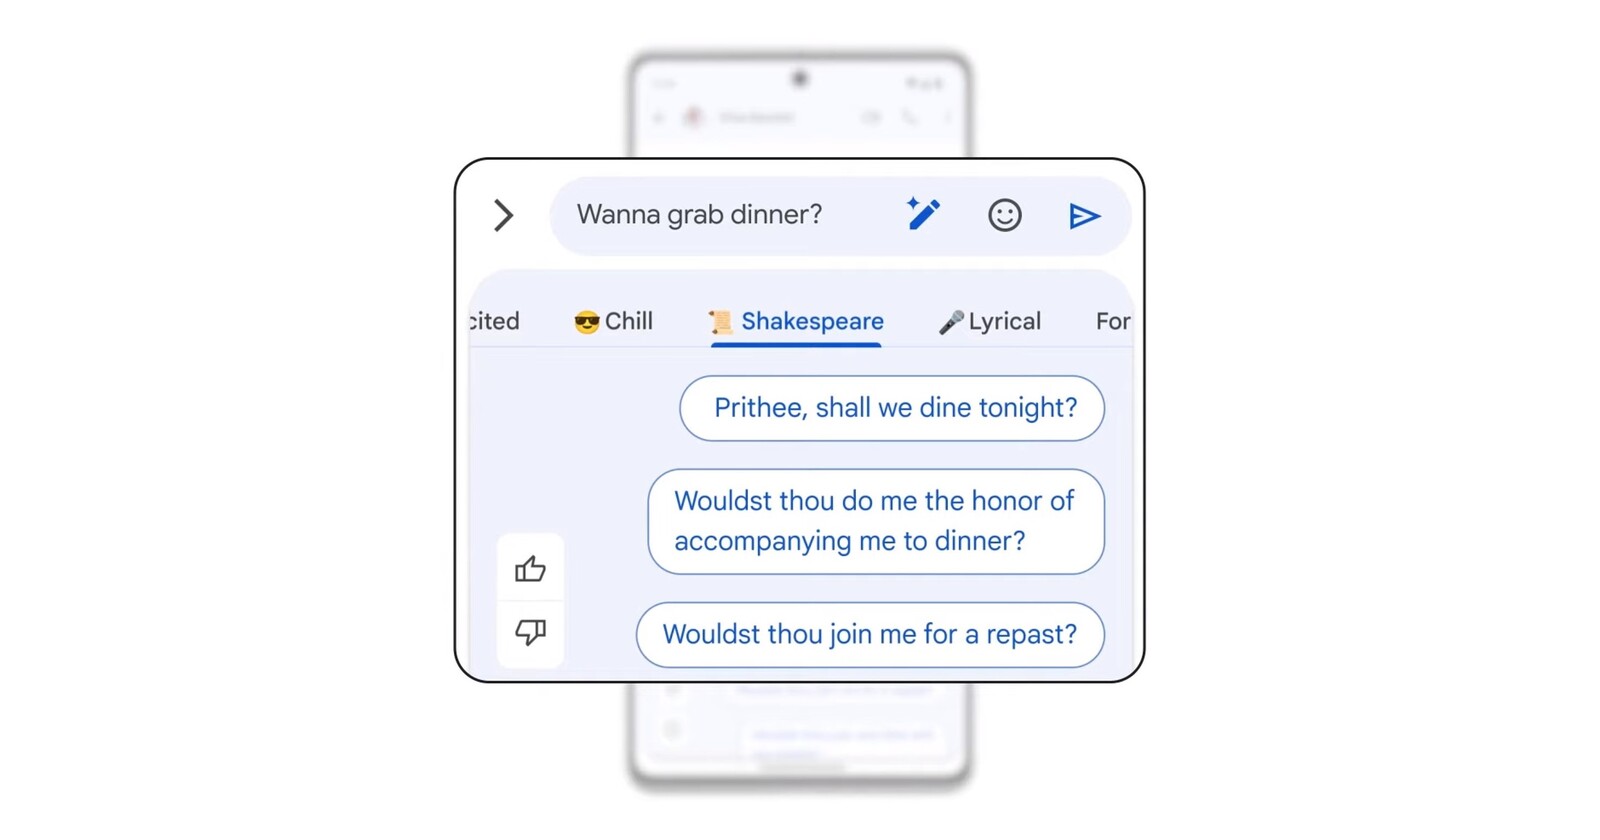 Magic Compose in Google Messages could soon get advanced input suggestions